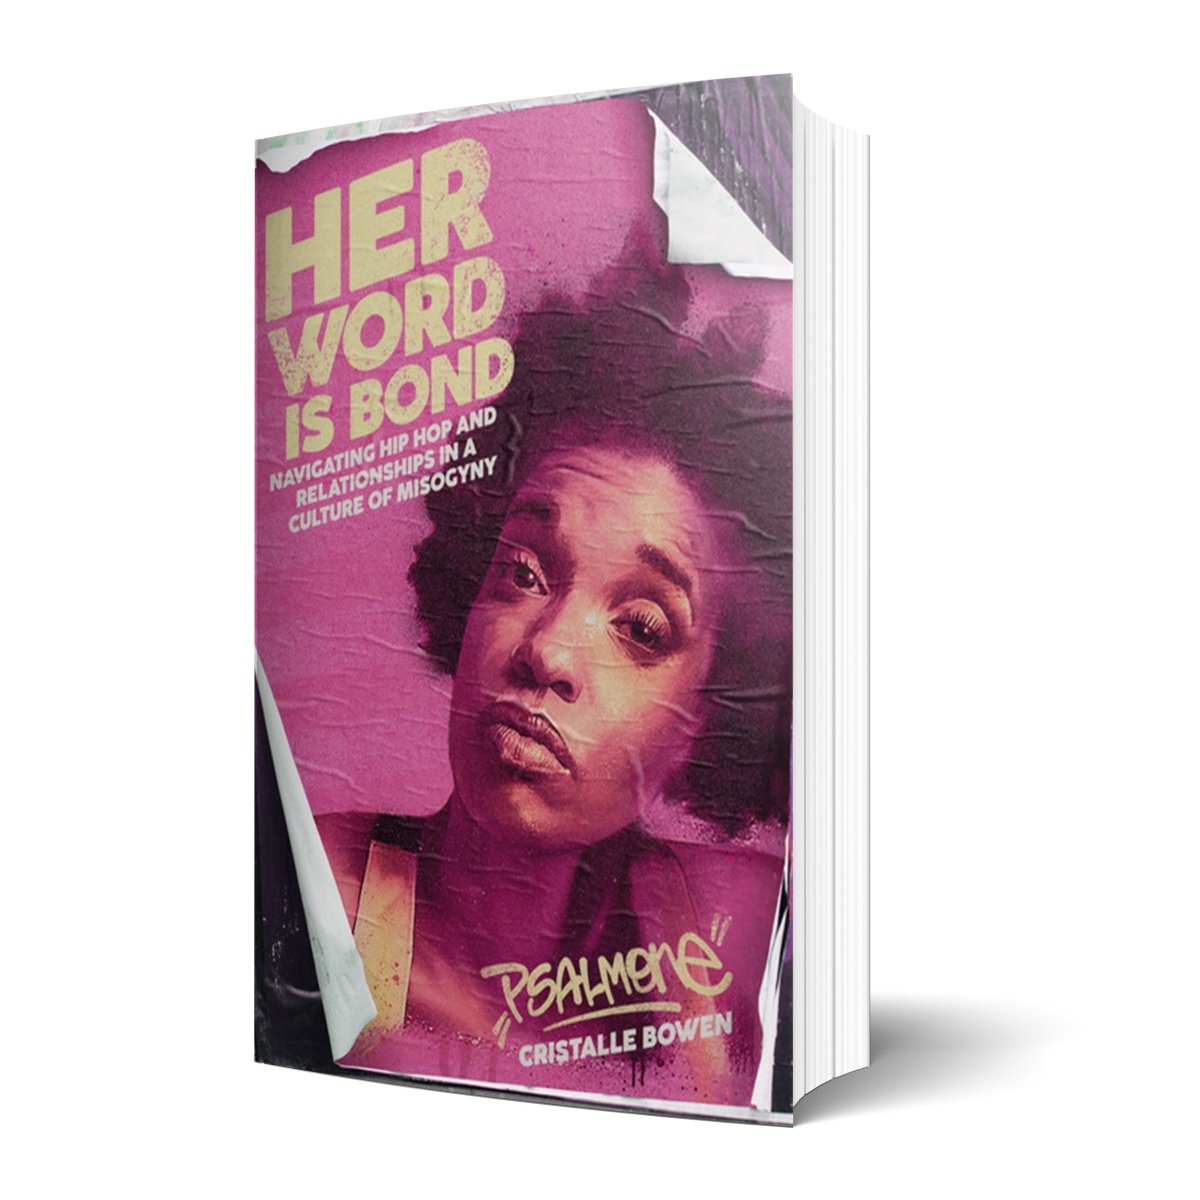 Her Word Is Bond - Navigating Hip Hop and Relationships in a Culture of Misogyny Vinyl